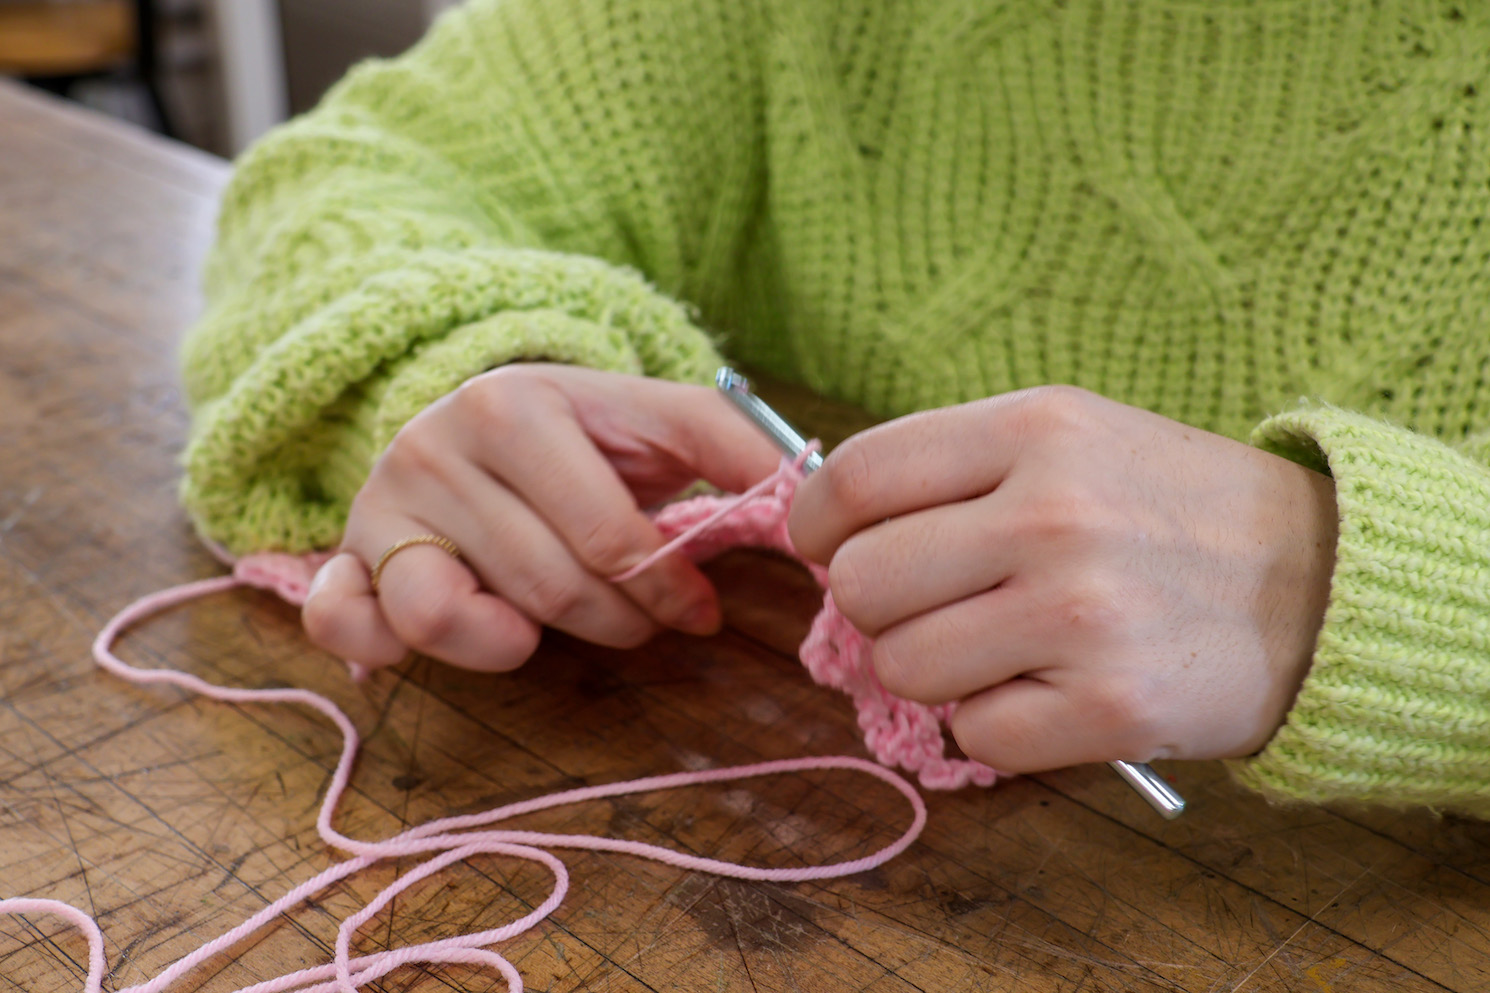 Becca Panes wears a neon green knitted sweater. Becca holds a metallic crochet hook and pink yarns.